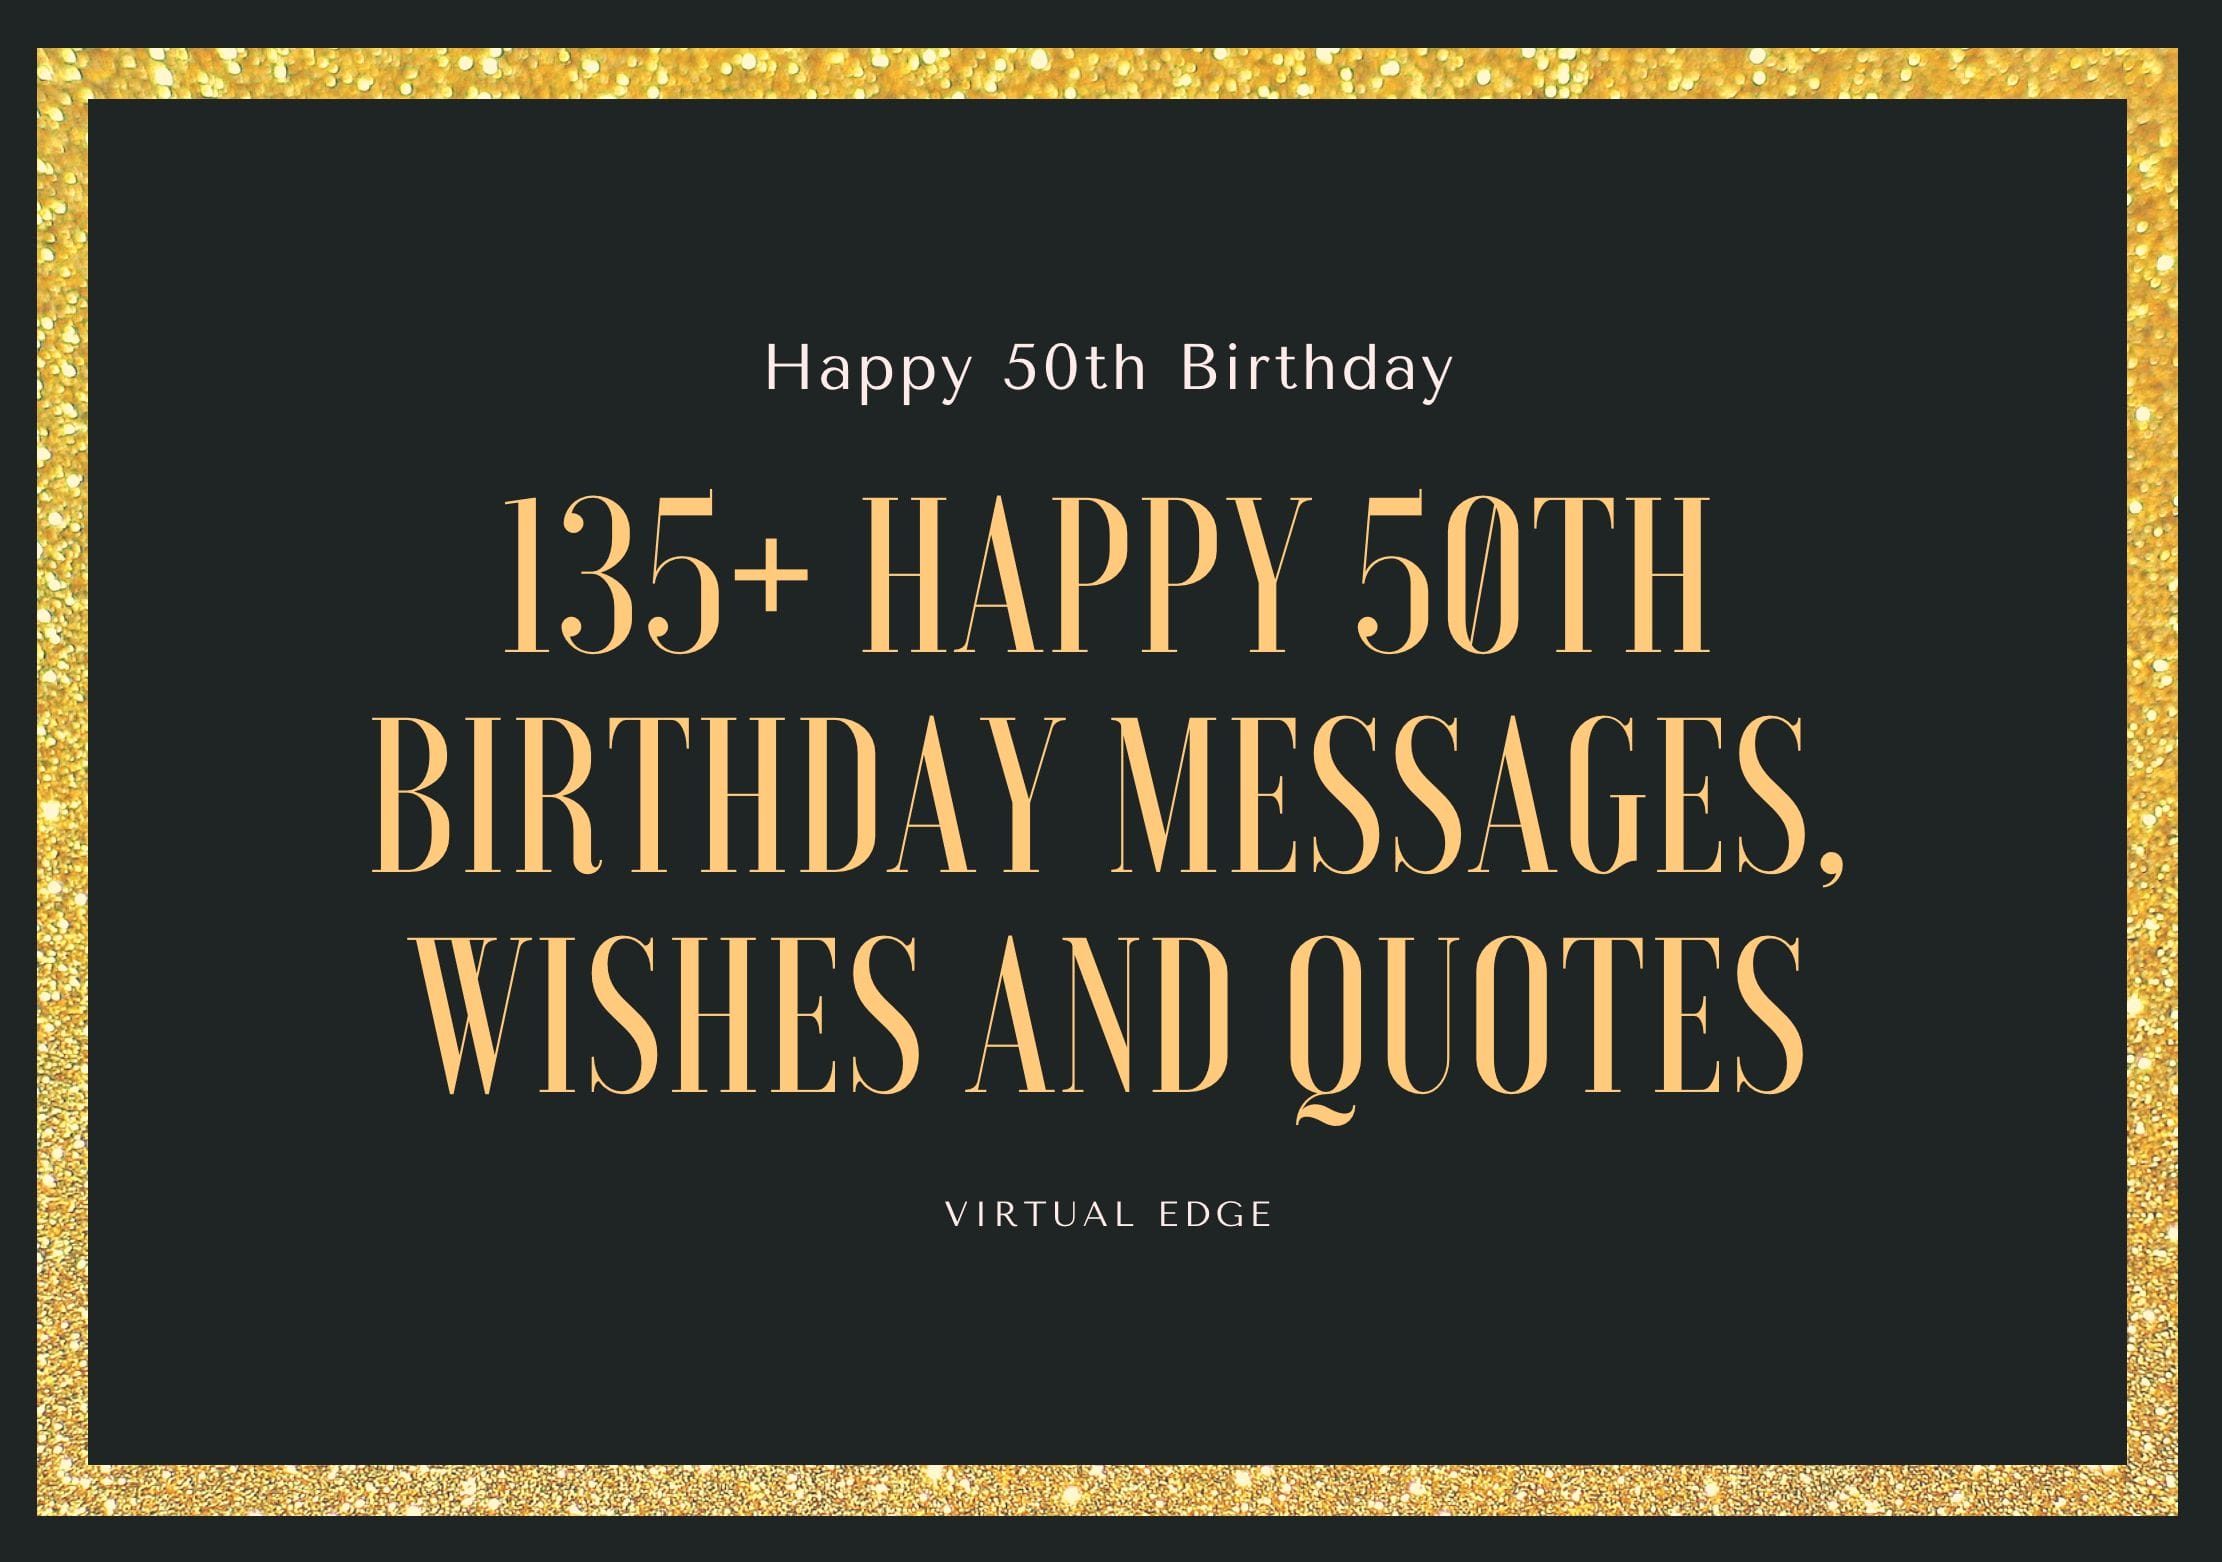 135-happy-50th-birthday-messages-wishes-and-quotes-virtual-edge